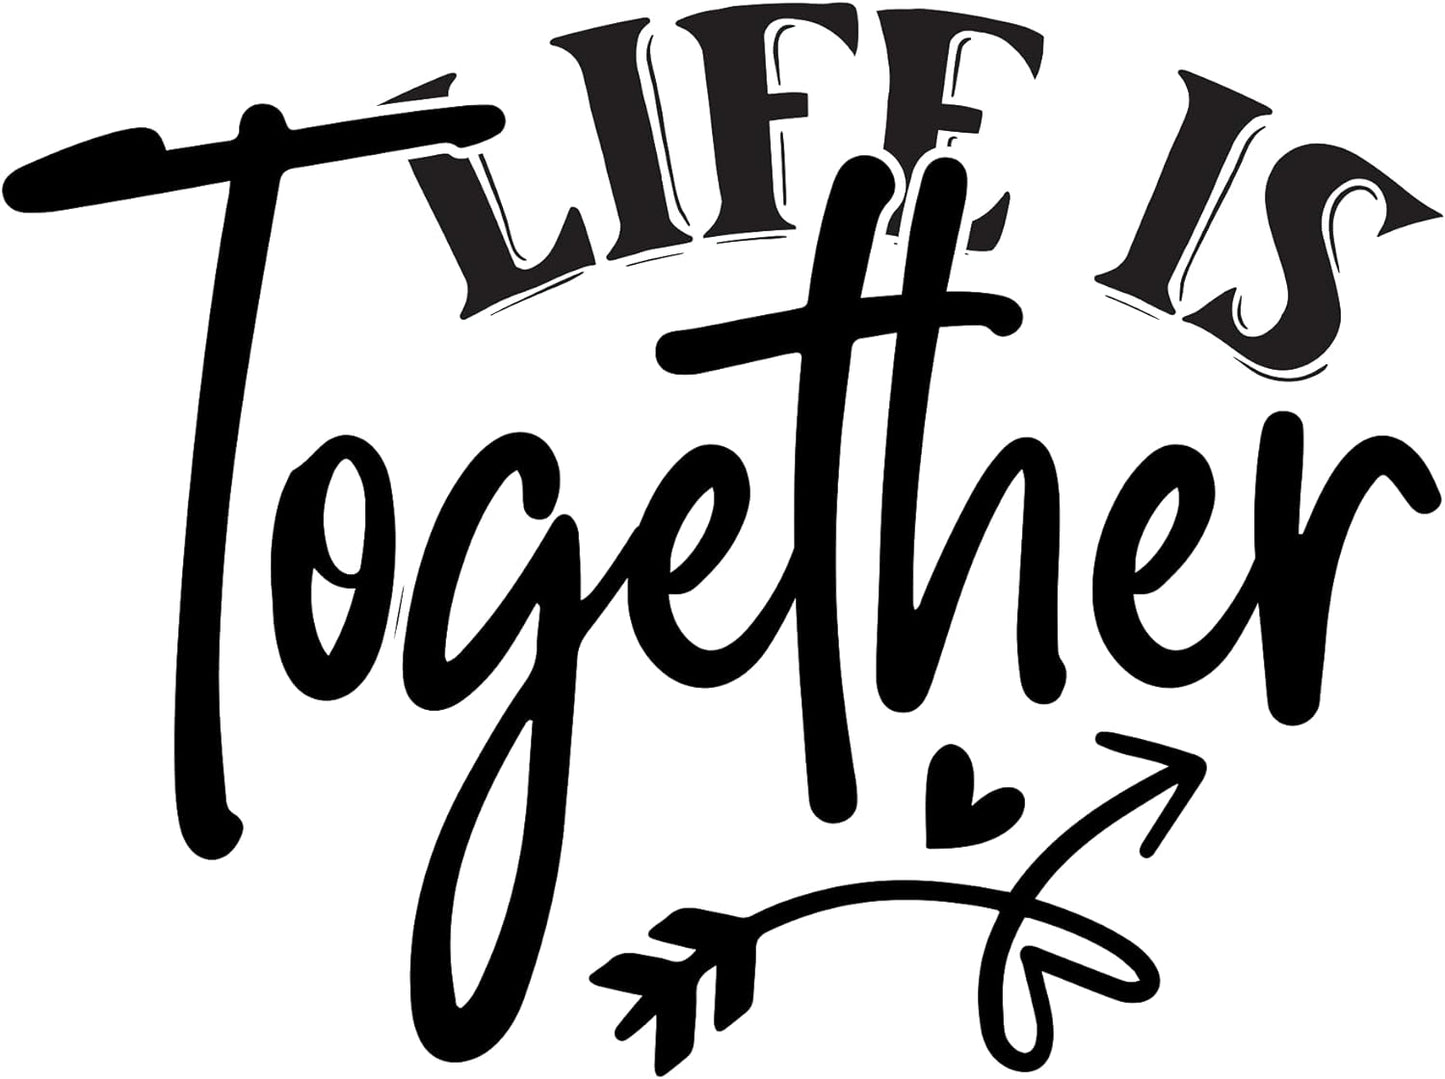 Inspirational Quote "Life is Together," Motivational Sticker Vinyl Decal Motivation Stickers- 5" Vinyl Sticker Waterproof